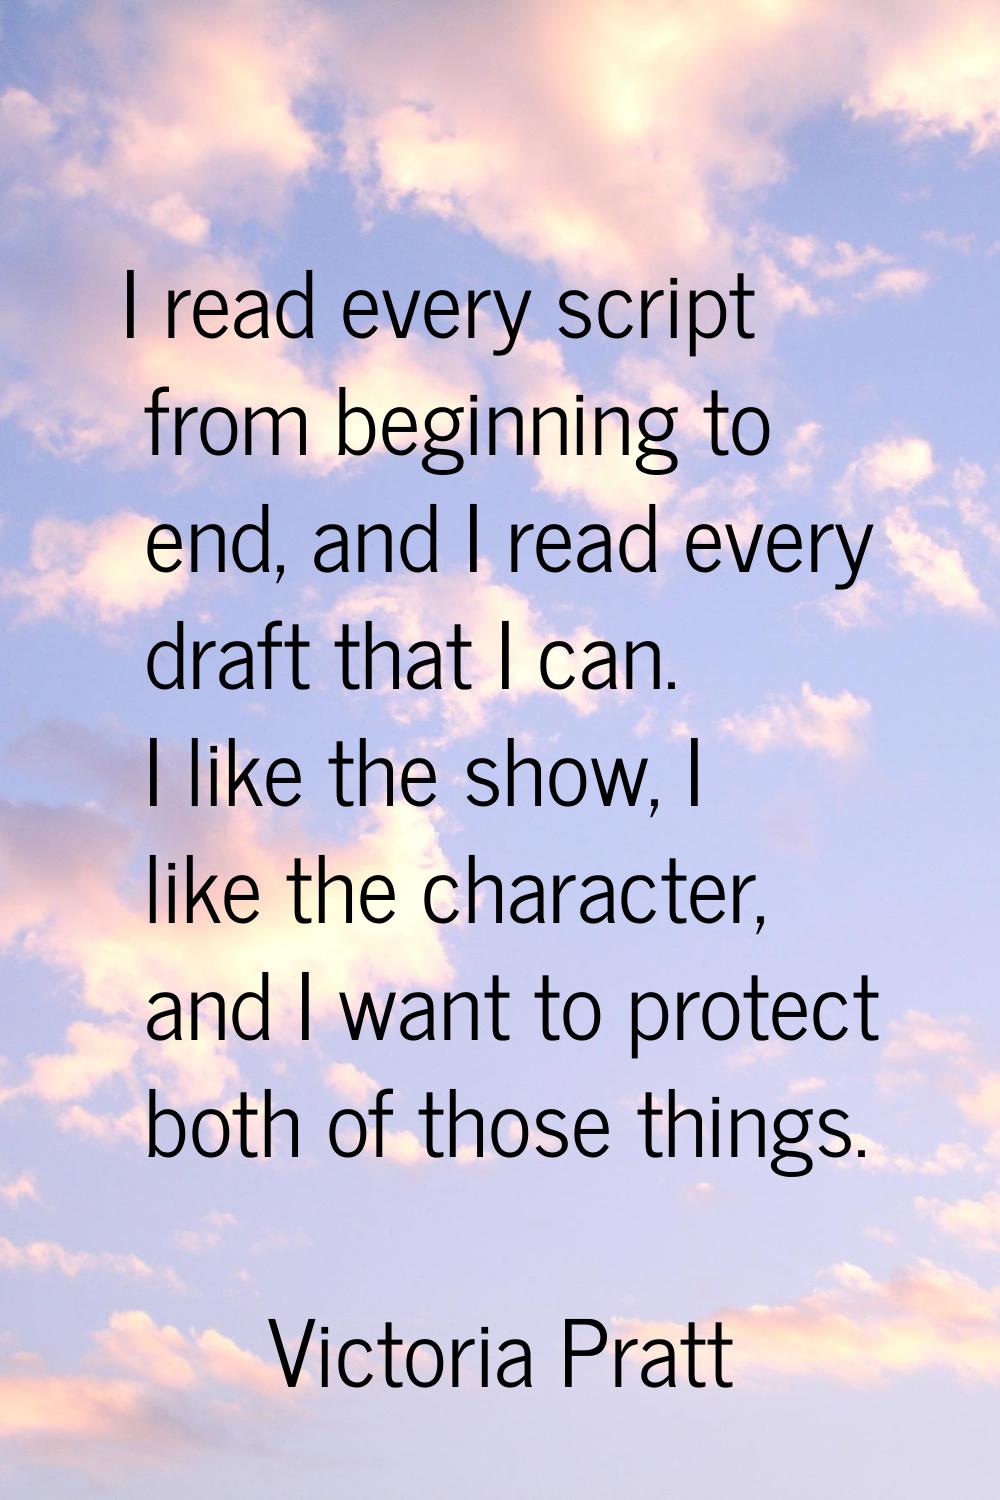 I read every script from beginning to end, and I read every draft that I can. I like the show, I li